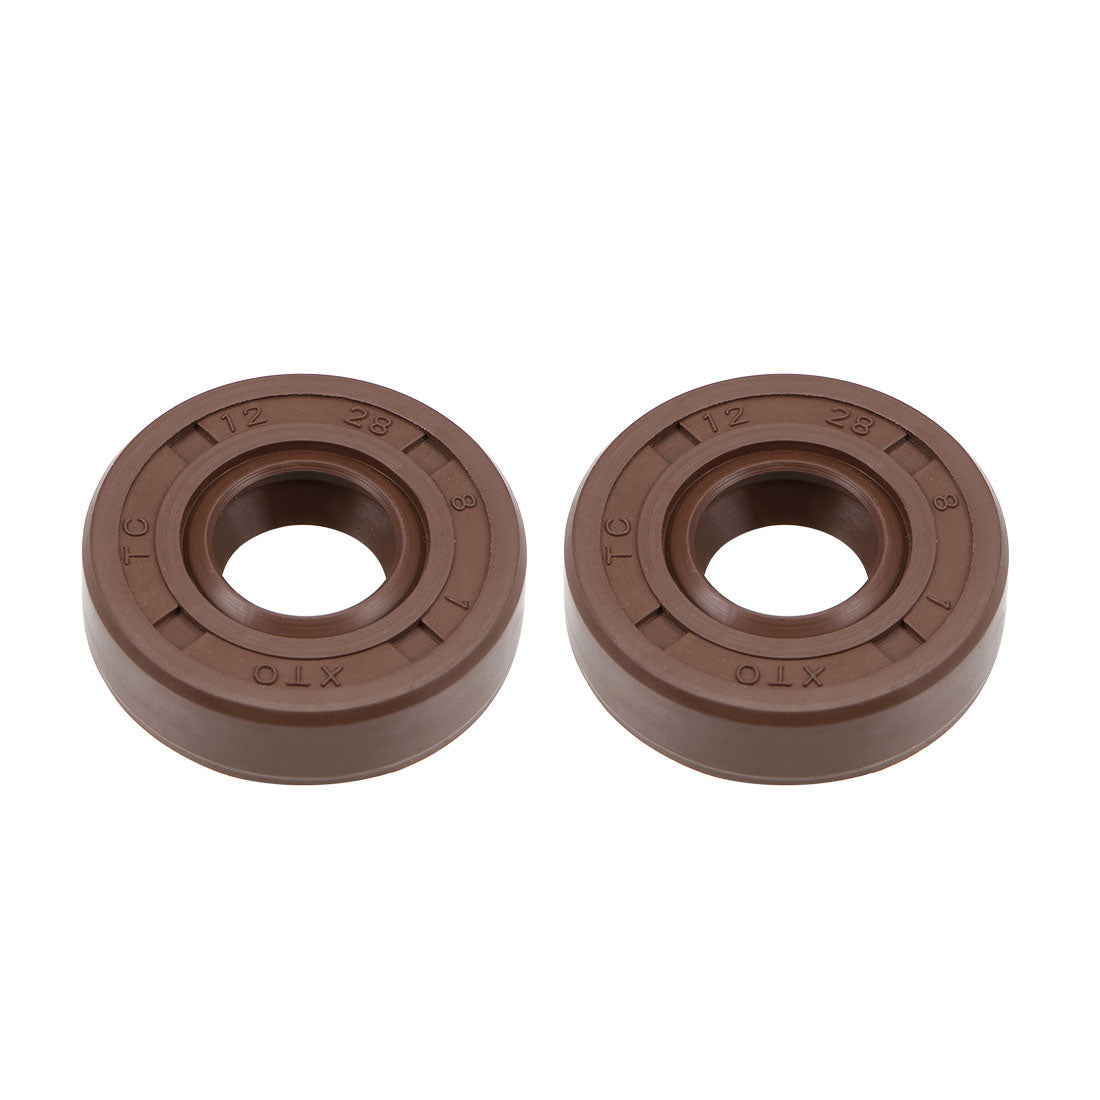 uxcell Uxcell Oil Seal 12mm Inner Dia 28mm OD 8mm Thick Fluorine Rubber Double Lip Seals 2Pcs